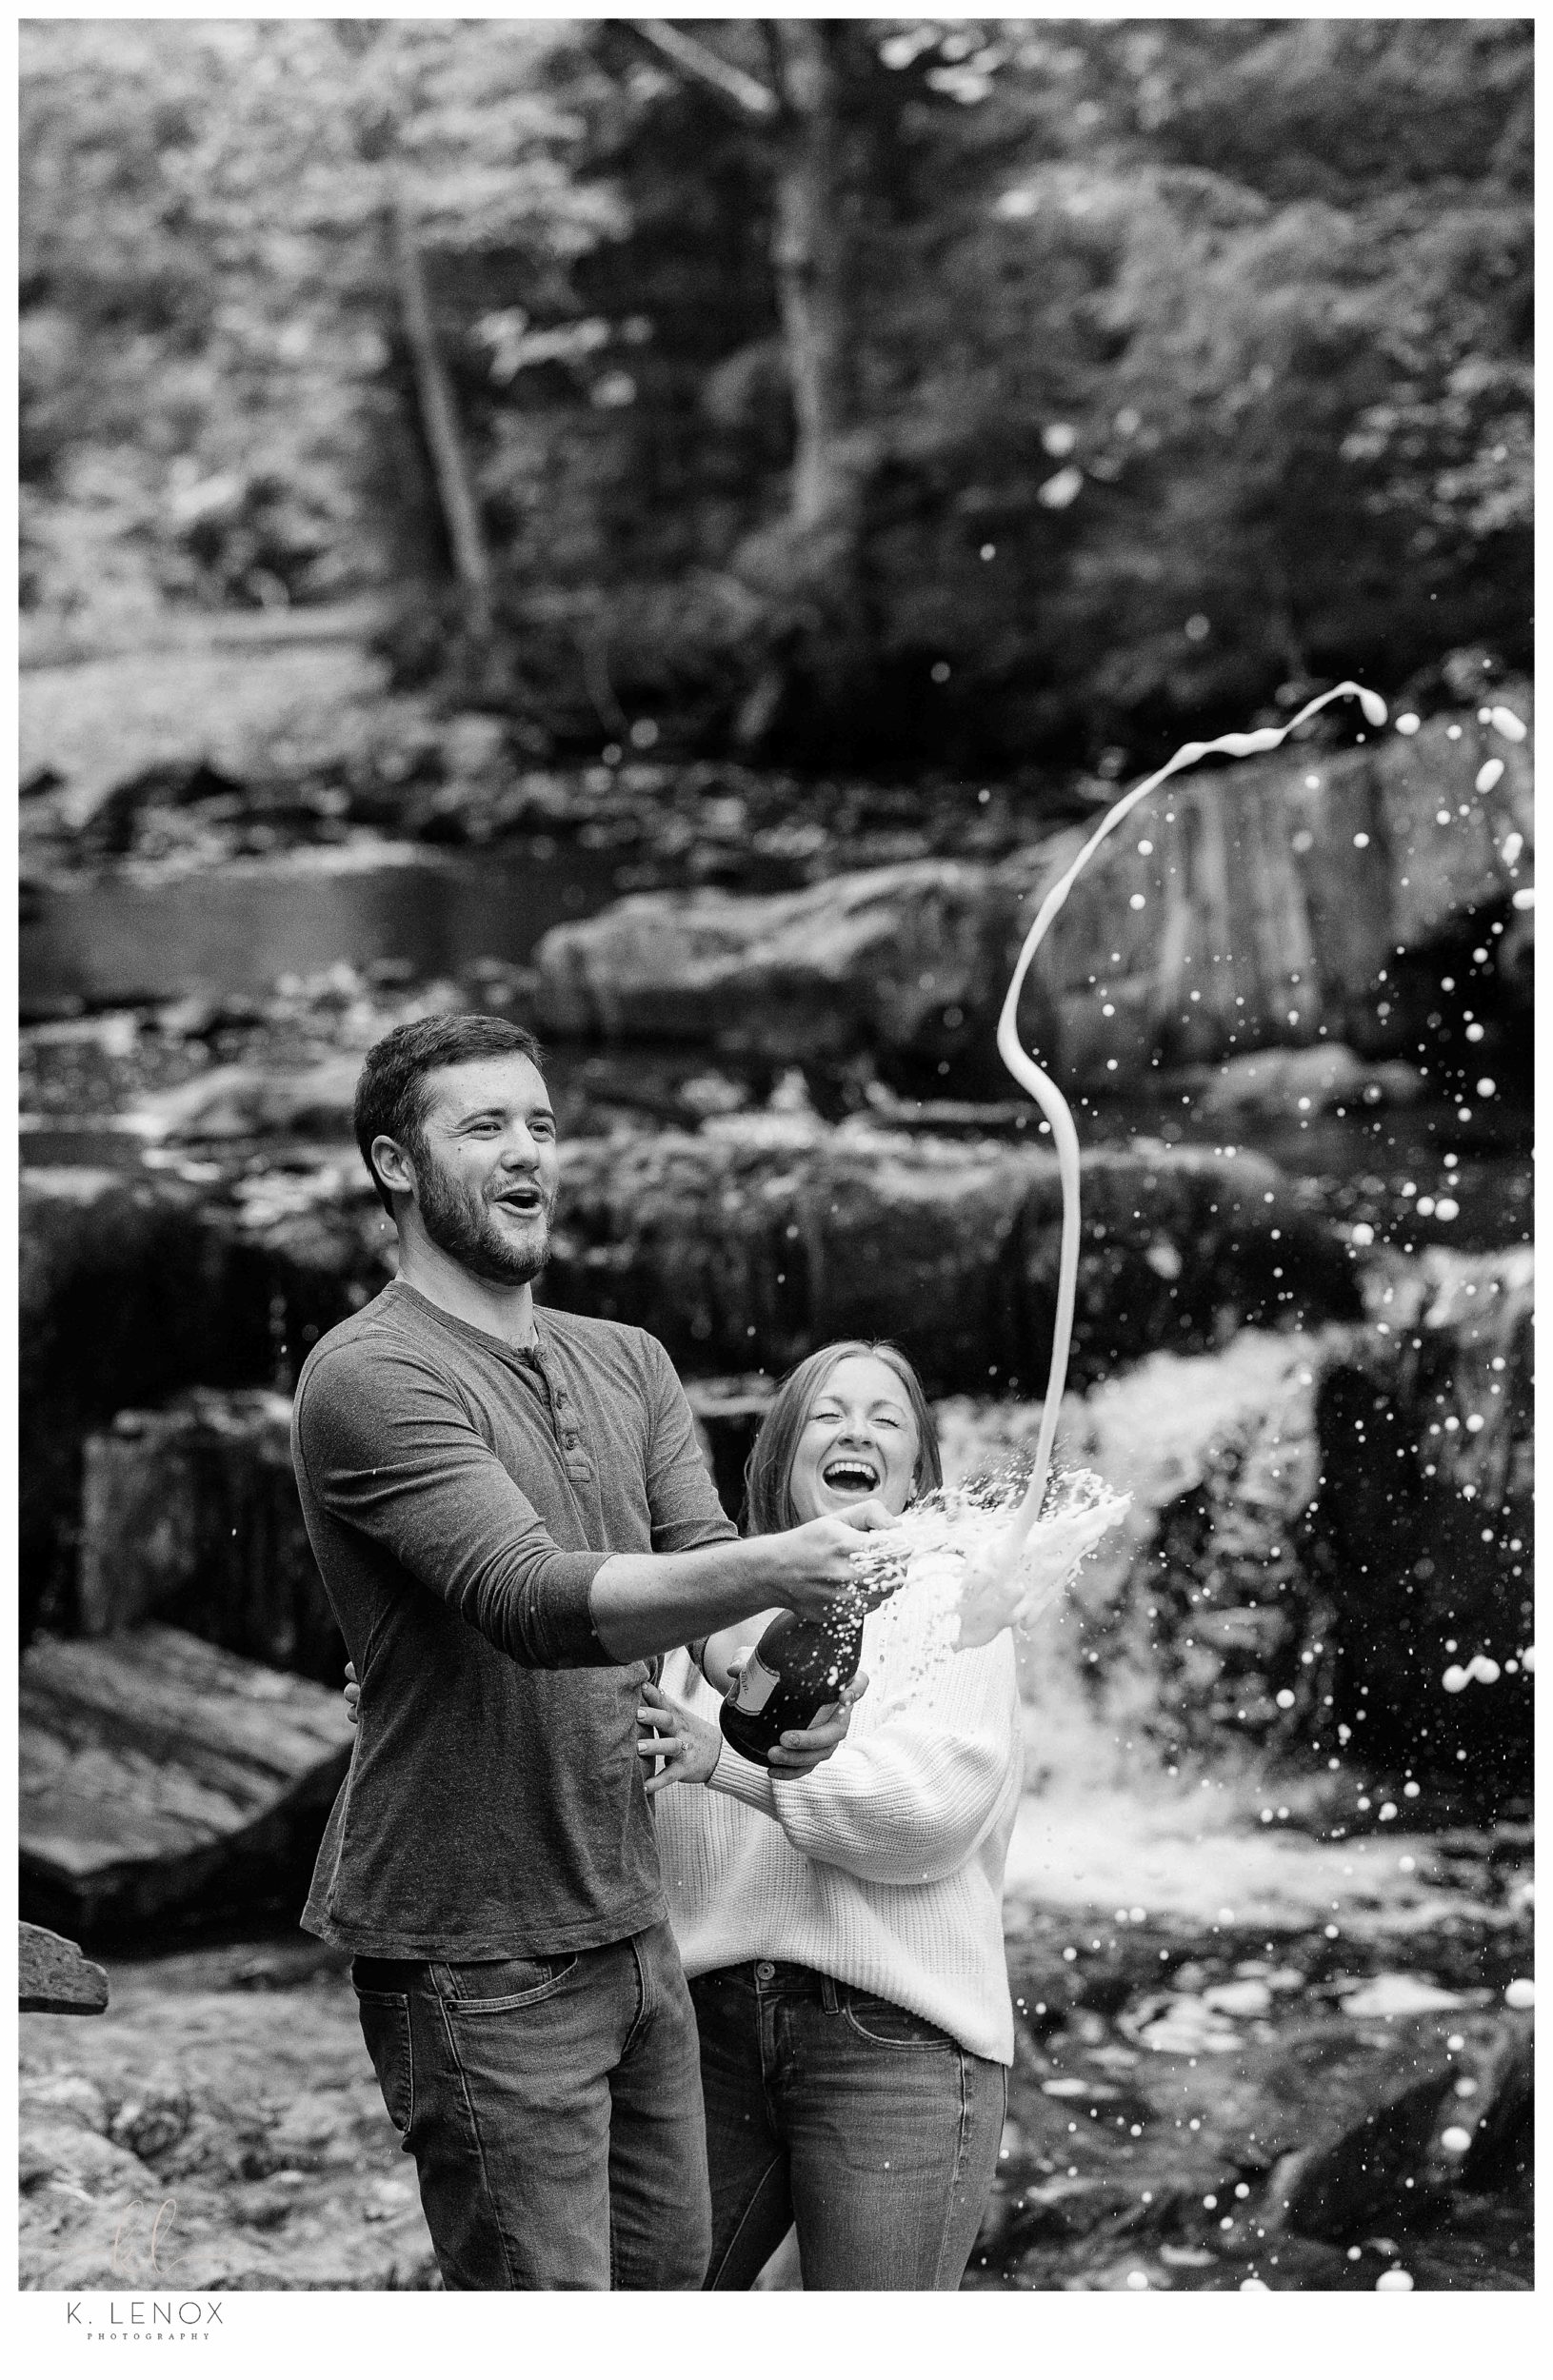 Vermont Fall Engagement Session